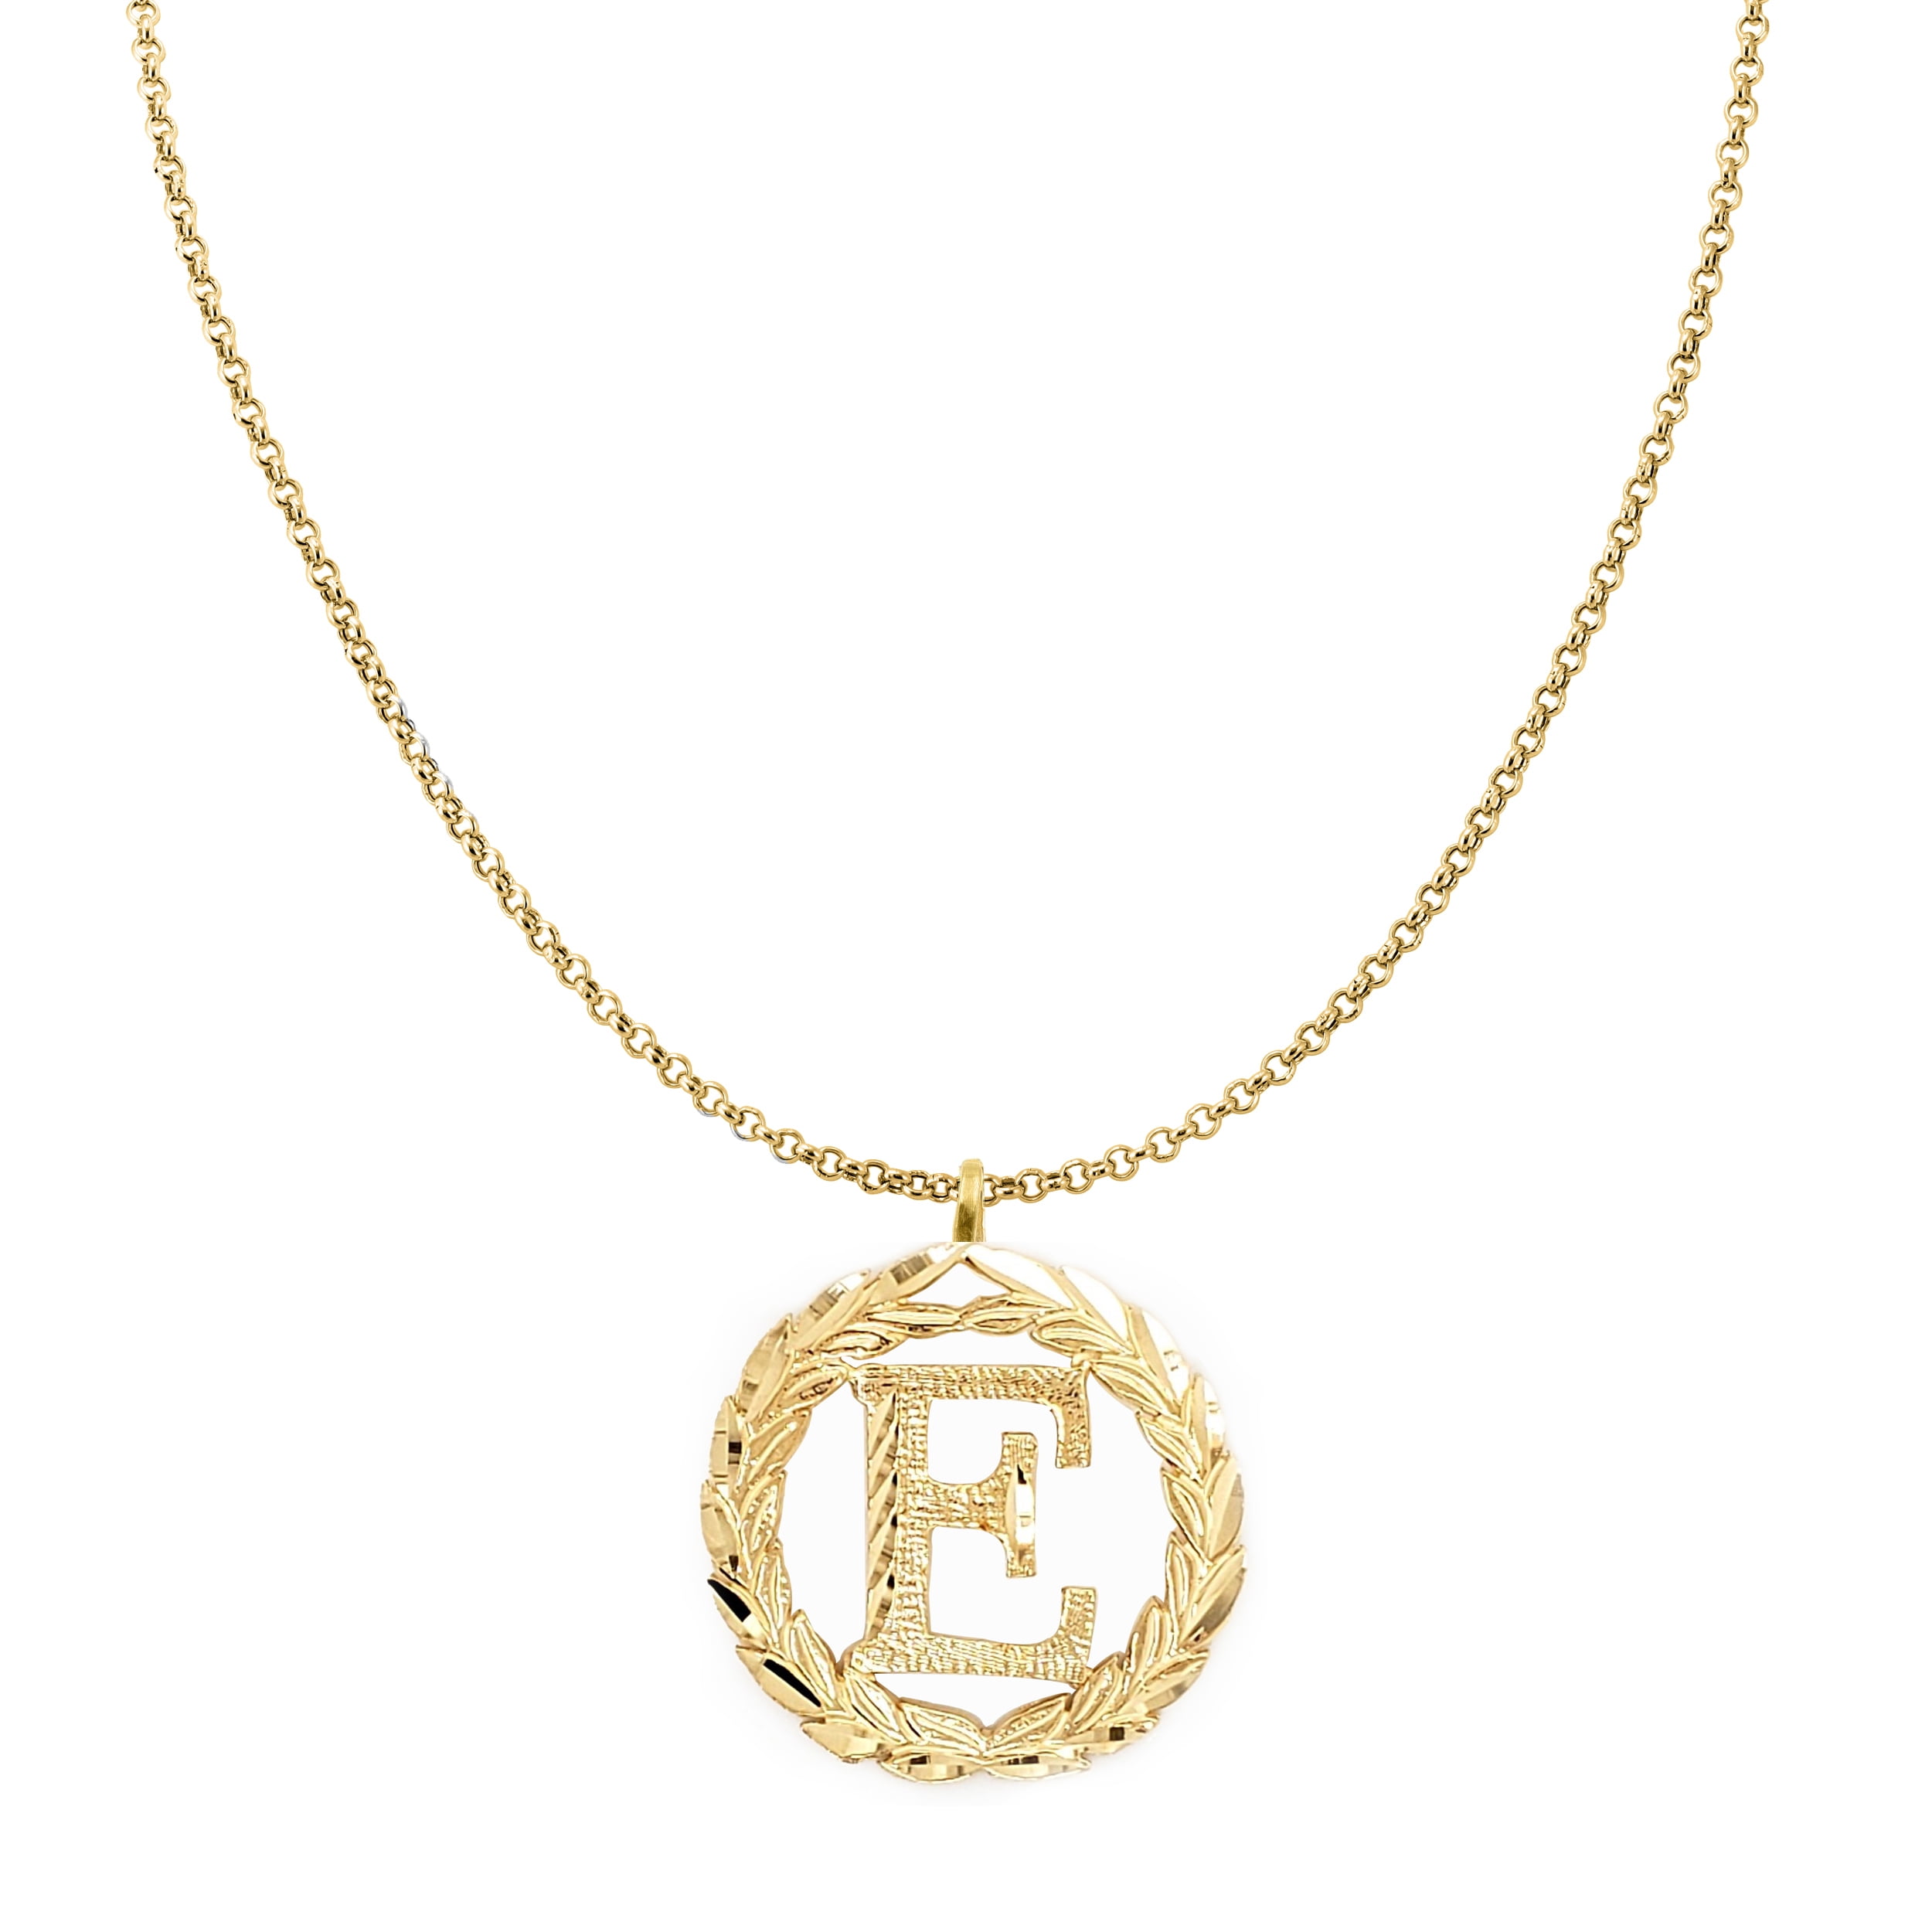 Details about   14k Yellow Gold Round Wreath Initial Letter 'E' Pendant